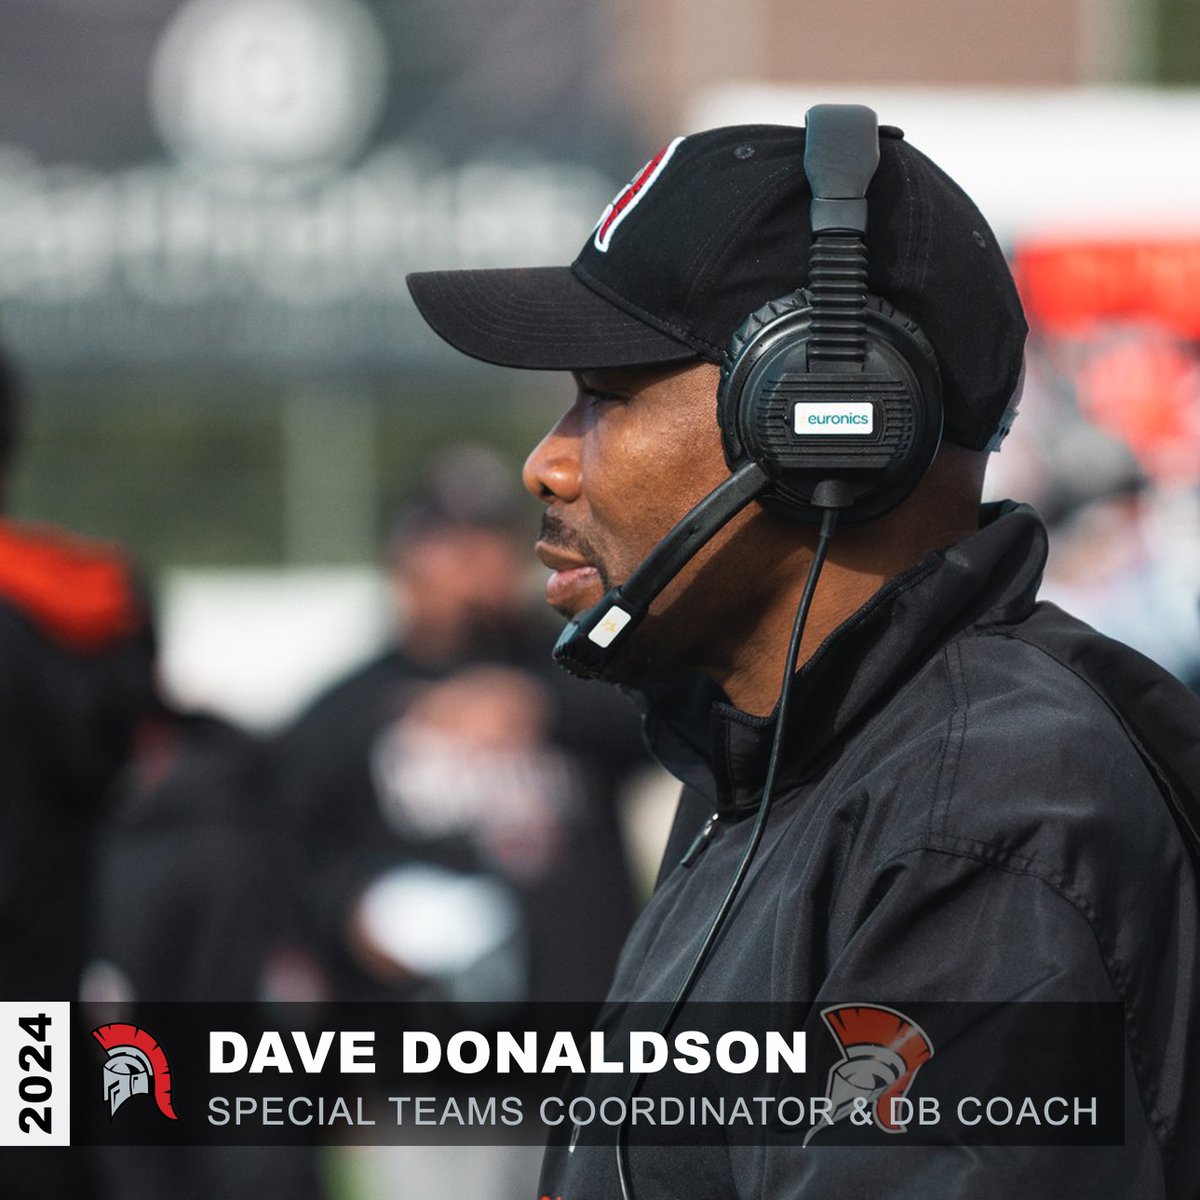 Dave Donaldson übernimmt auch 2024 bei den Centurions die Position als Special Teams Coordinator & DB Coach. DC Jag Bal: 'It's an Honor to have the chance to work with a legend from the CFL. I'm excited to see what we can create together on the defensive side of the ball.“